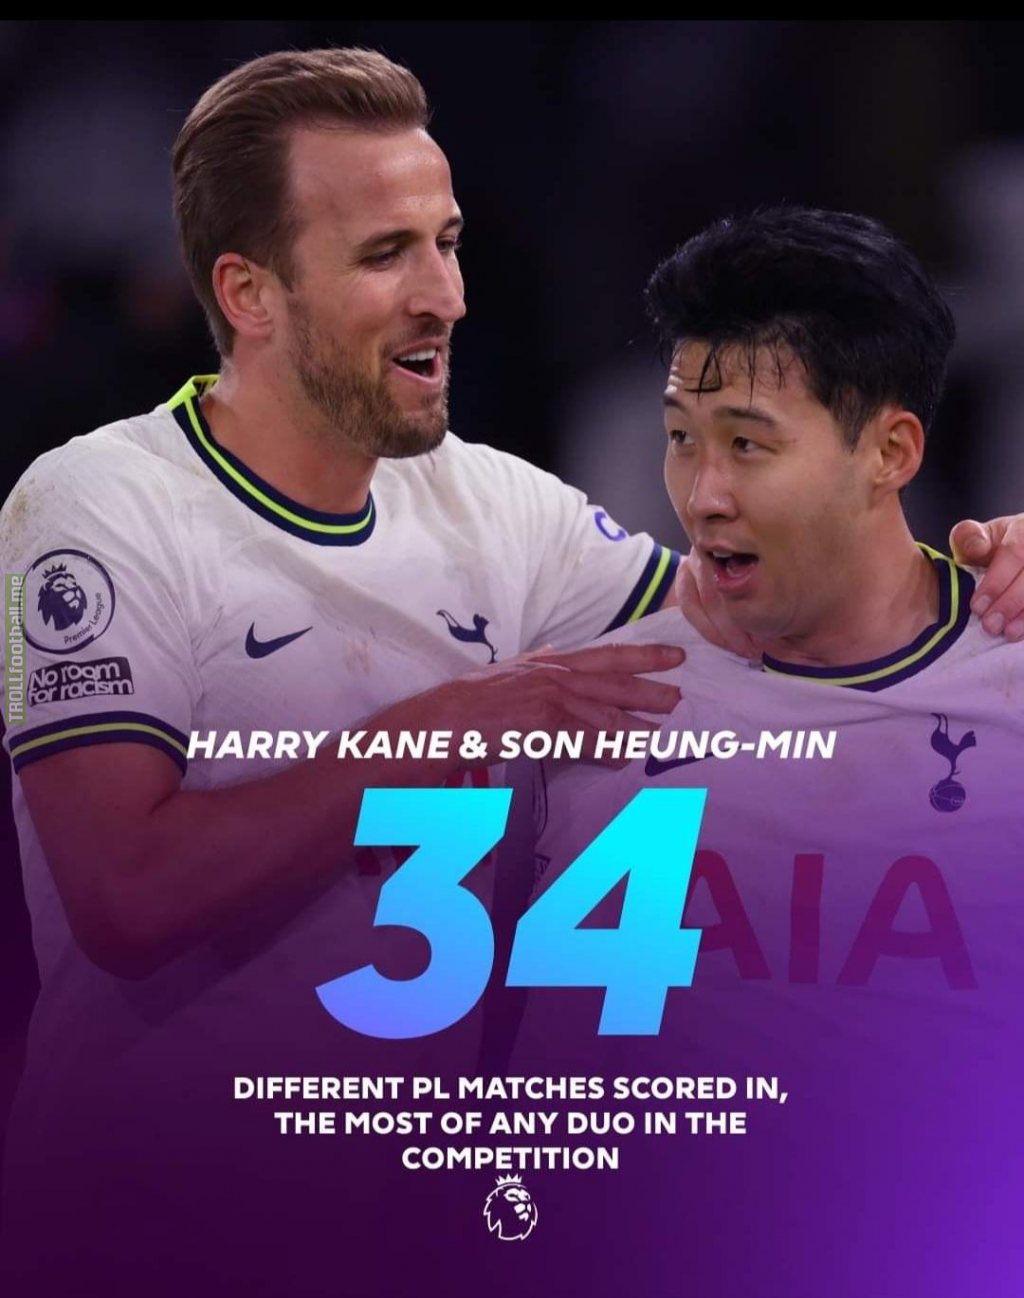 [Premier league] Son and Kane scored together in 34 matches which is a record